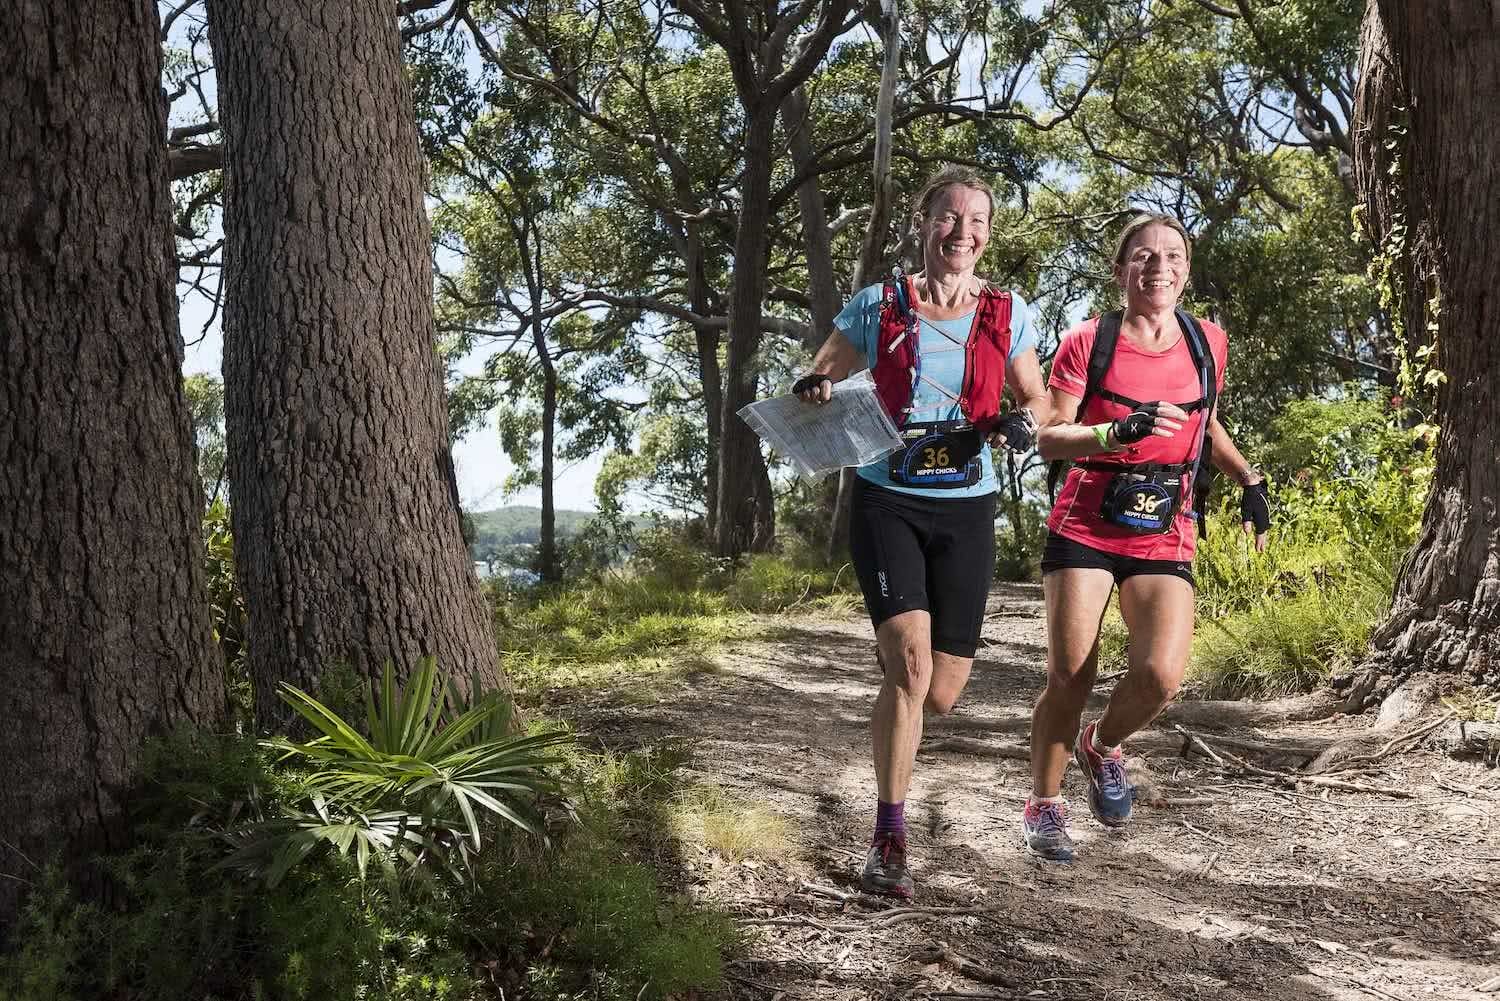 lake macquarie adventure race, 2019, maximum adventure, photo by outer image collective, trail running